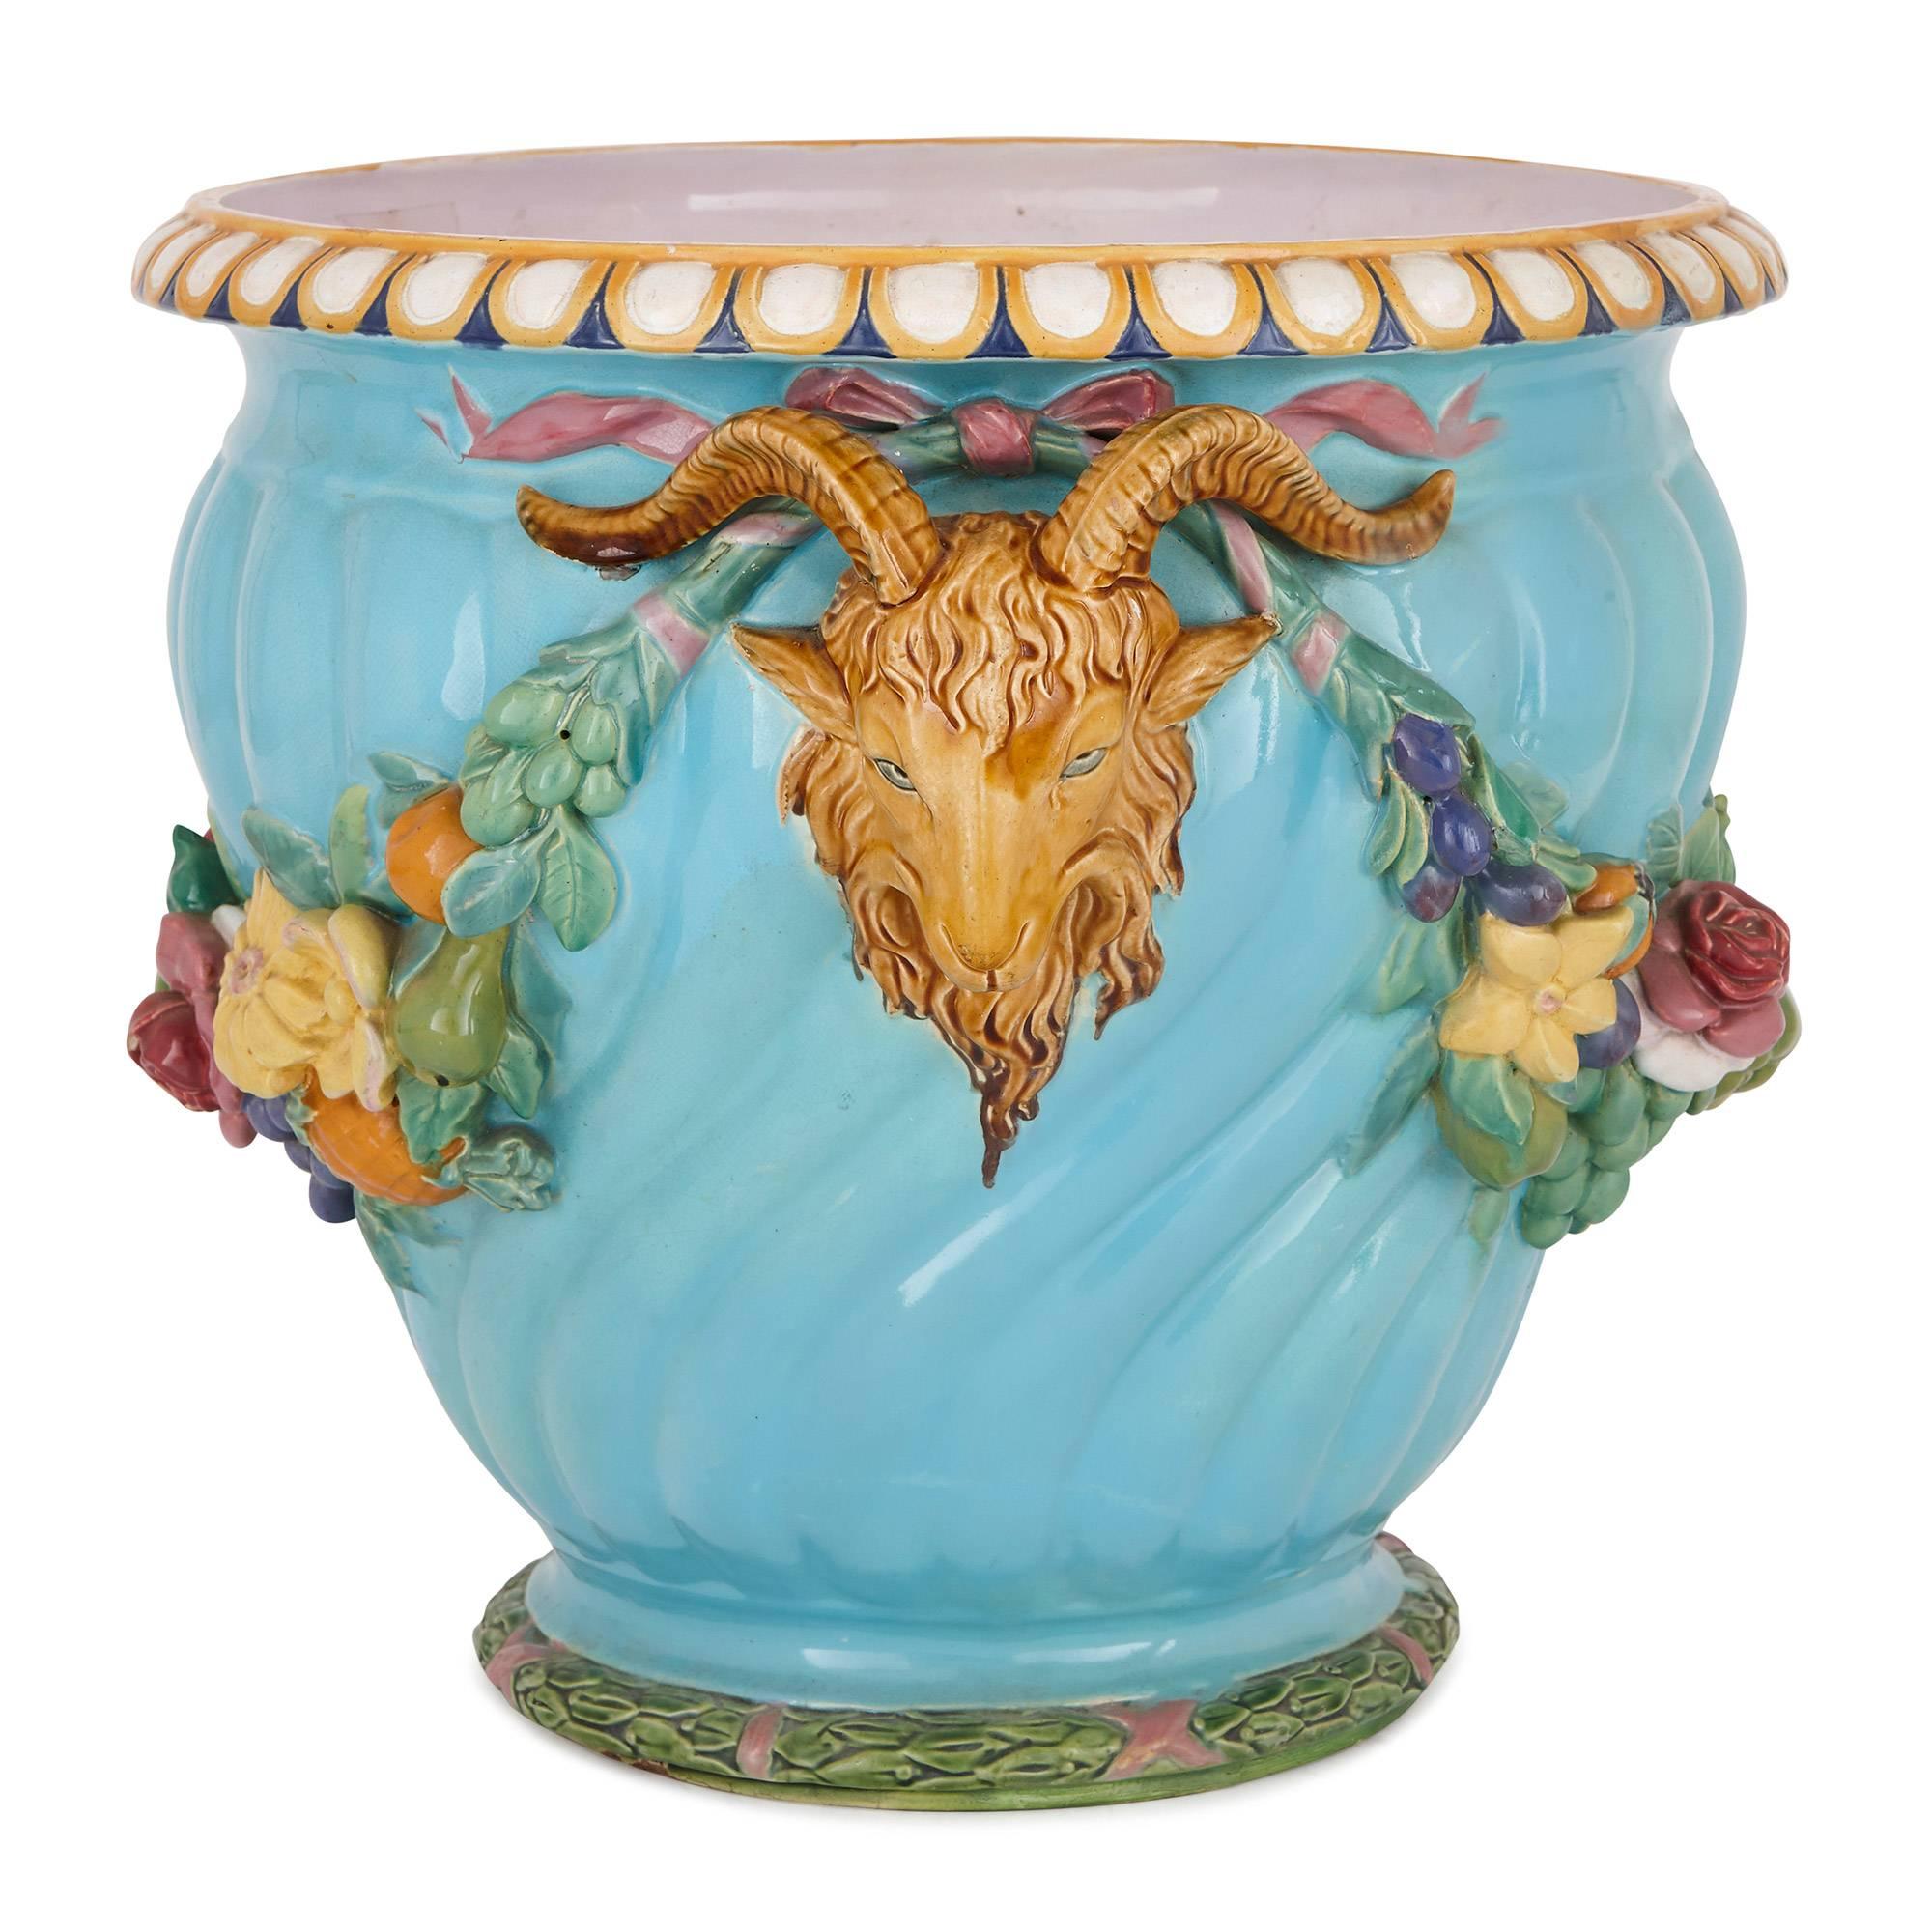 This exquisite jardinière was manufactured by the celebrated English company Minton, who are famous for their ceramics. It was designed by Baron Carlo Marochetti (1805-1867), an Italian-born sculptor who worked in London in the latter part of his